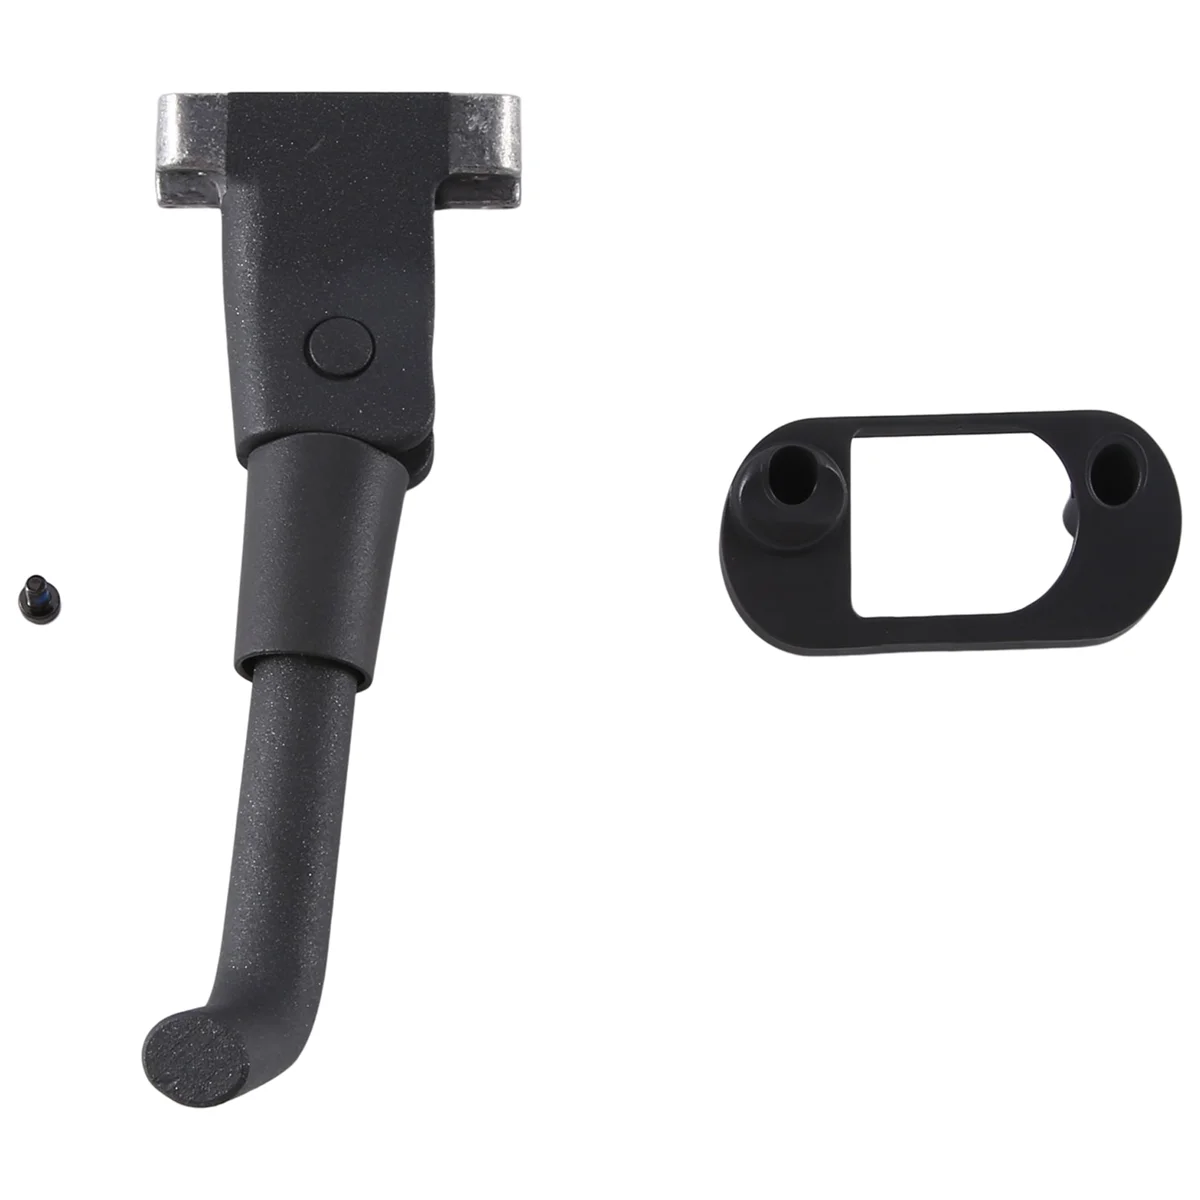 

Foot Kickstand for Ninebot E22 E25 E22D E45 Electric Scooter Parking Bracket Foot Support Parts